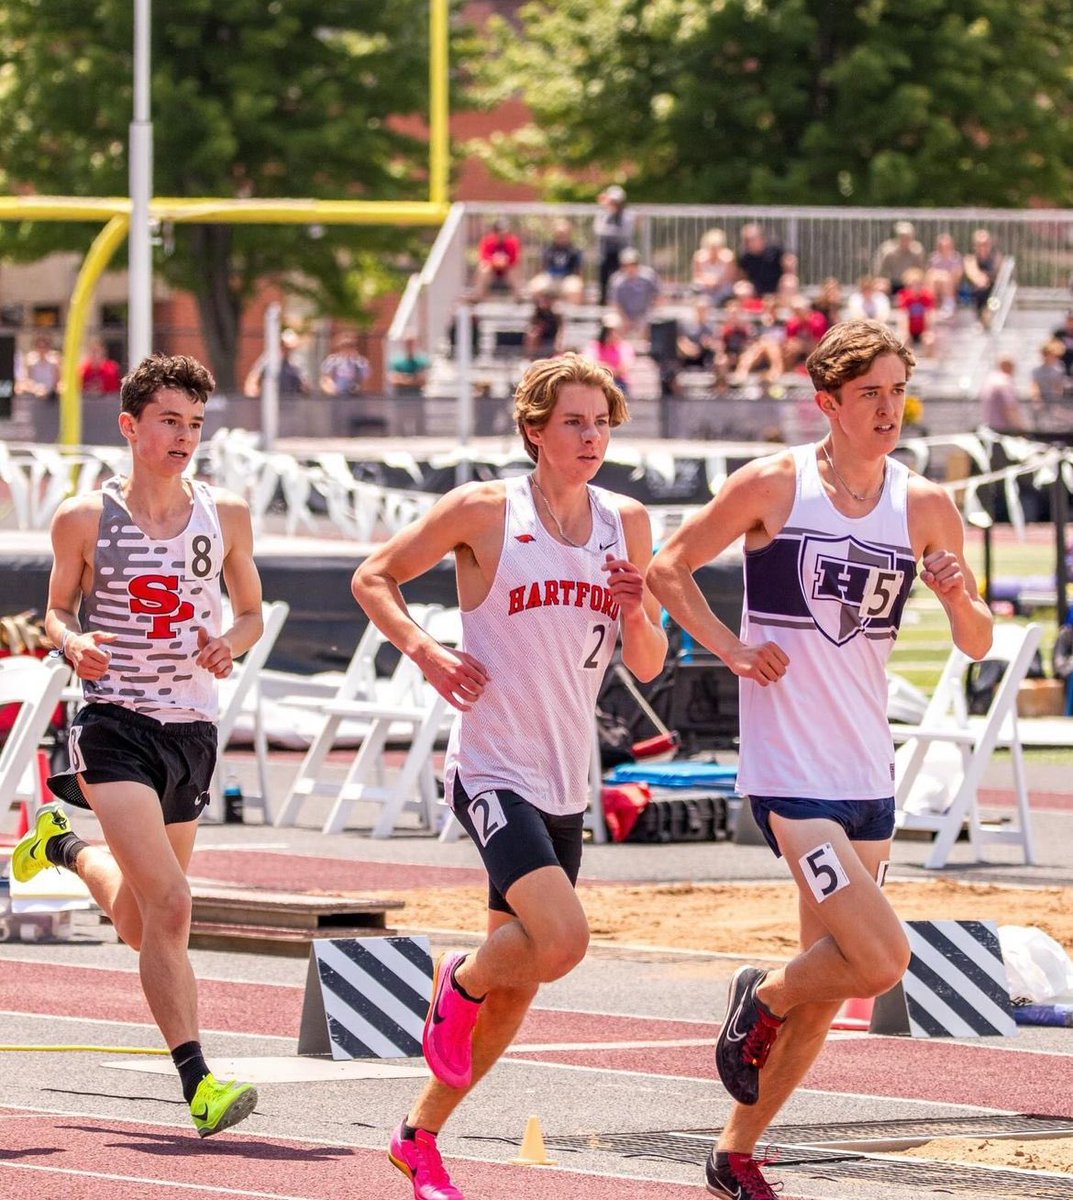 Congratulations to Mason Weber! A true leader for his peers and a blessing to Coach! Mason took fourth place yesterday in the 3200m run at the 2024 WIAA State Championships. Congratulations to Coach Paul as well!